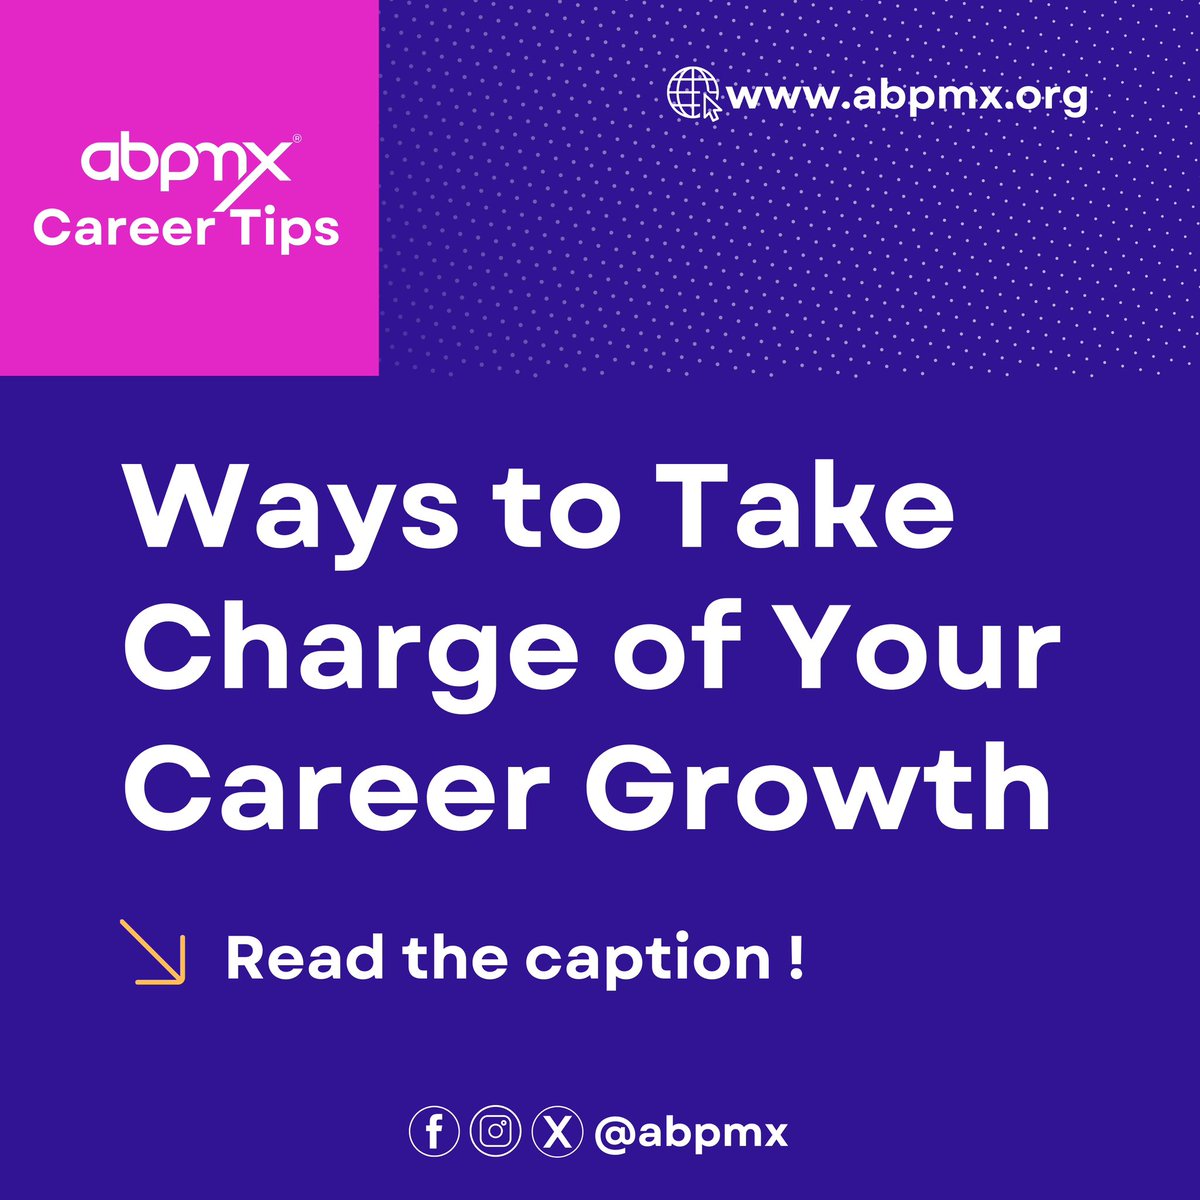 To be frank, the things you need to do to take charge of your PM Career growth can not be limited to a particular number, especially if you are just new in the PM Field.

So here are some ways you can take charge of your PM career growth